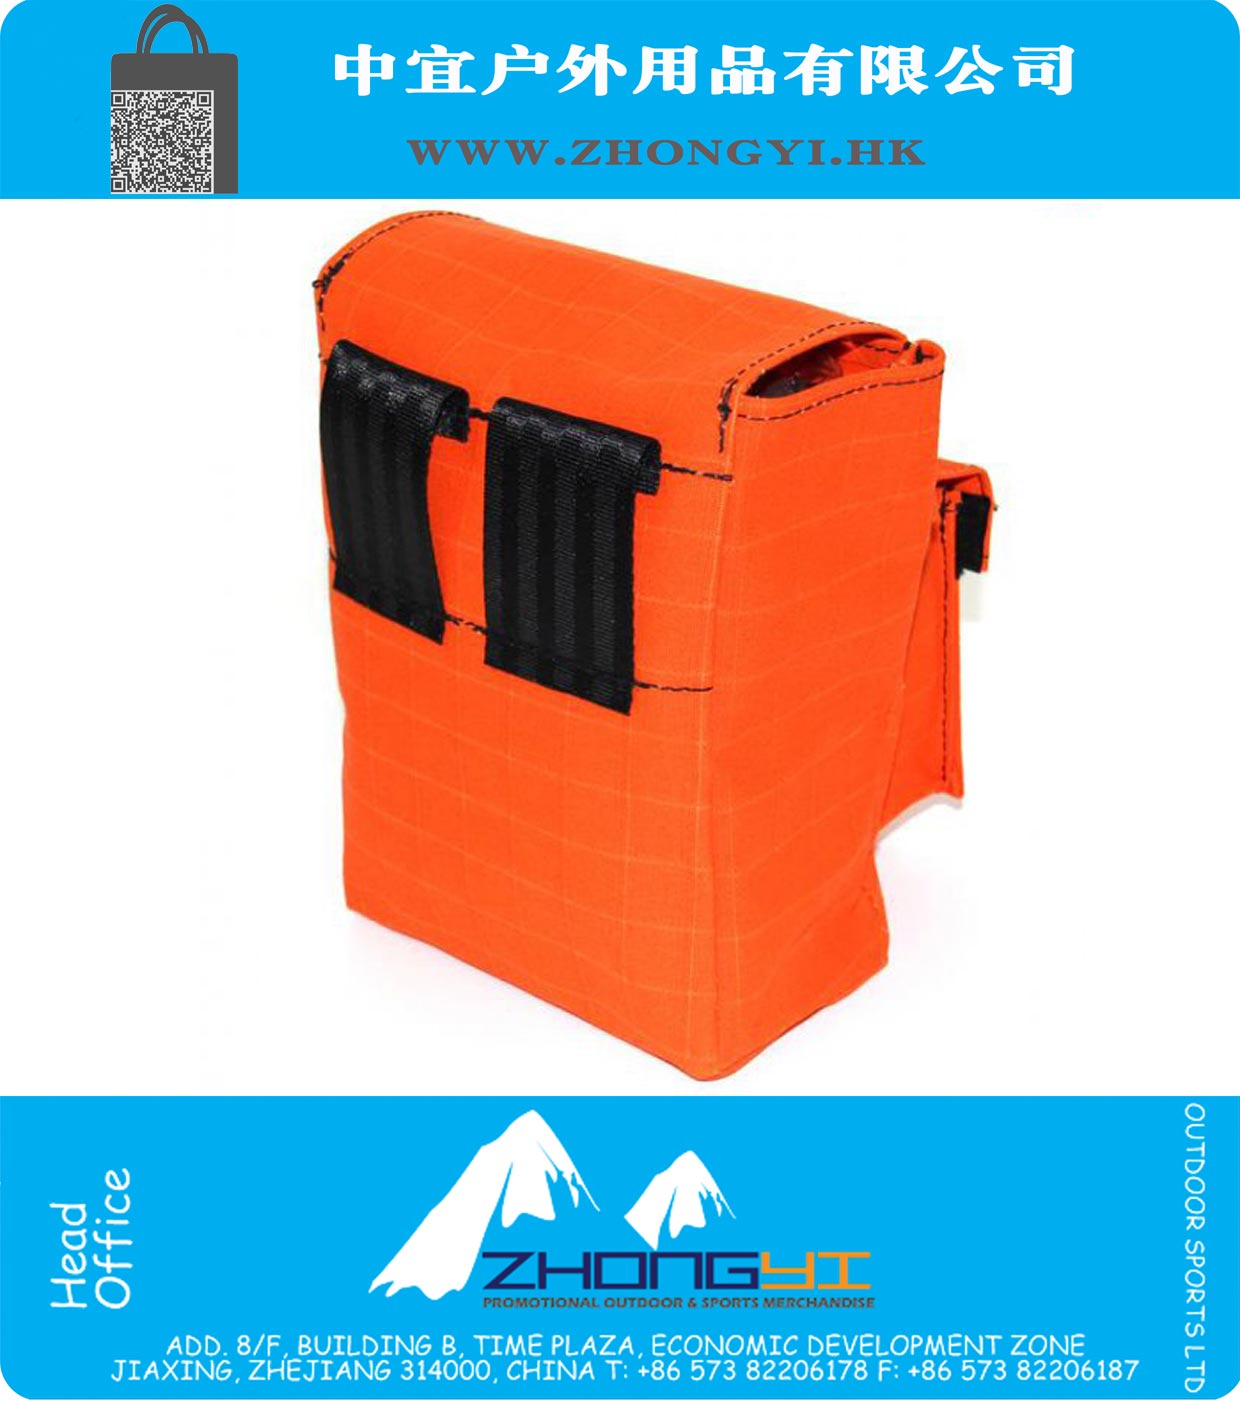 Canvas High Visibility Self-Rescuer Pouch